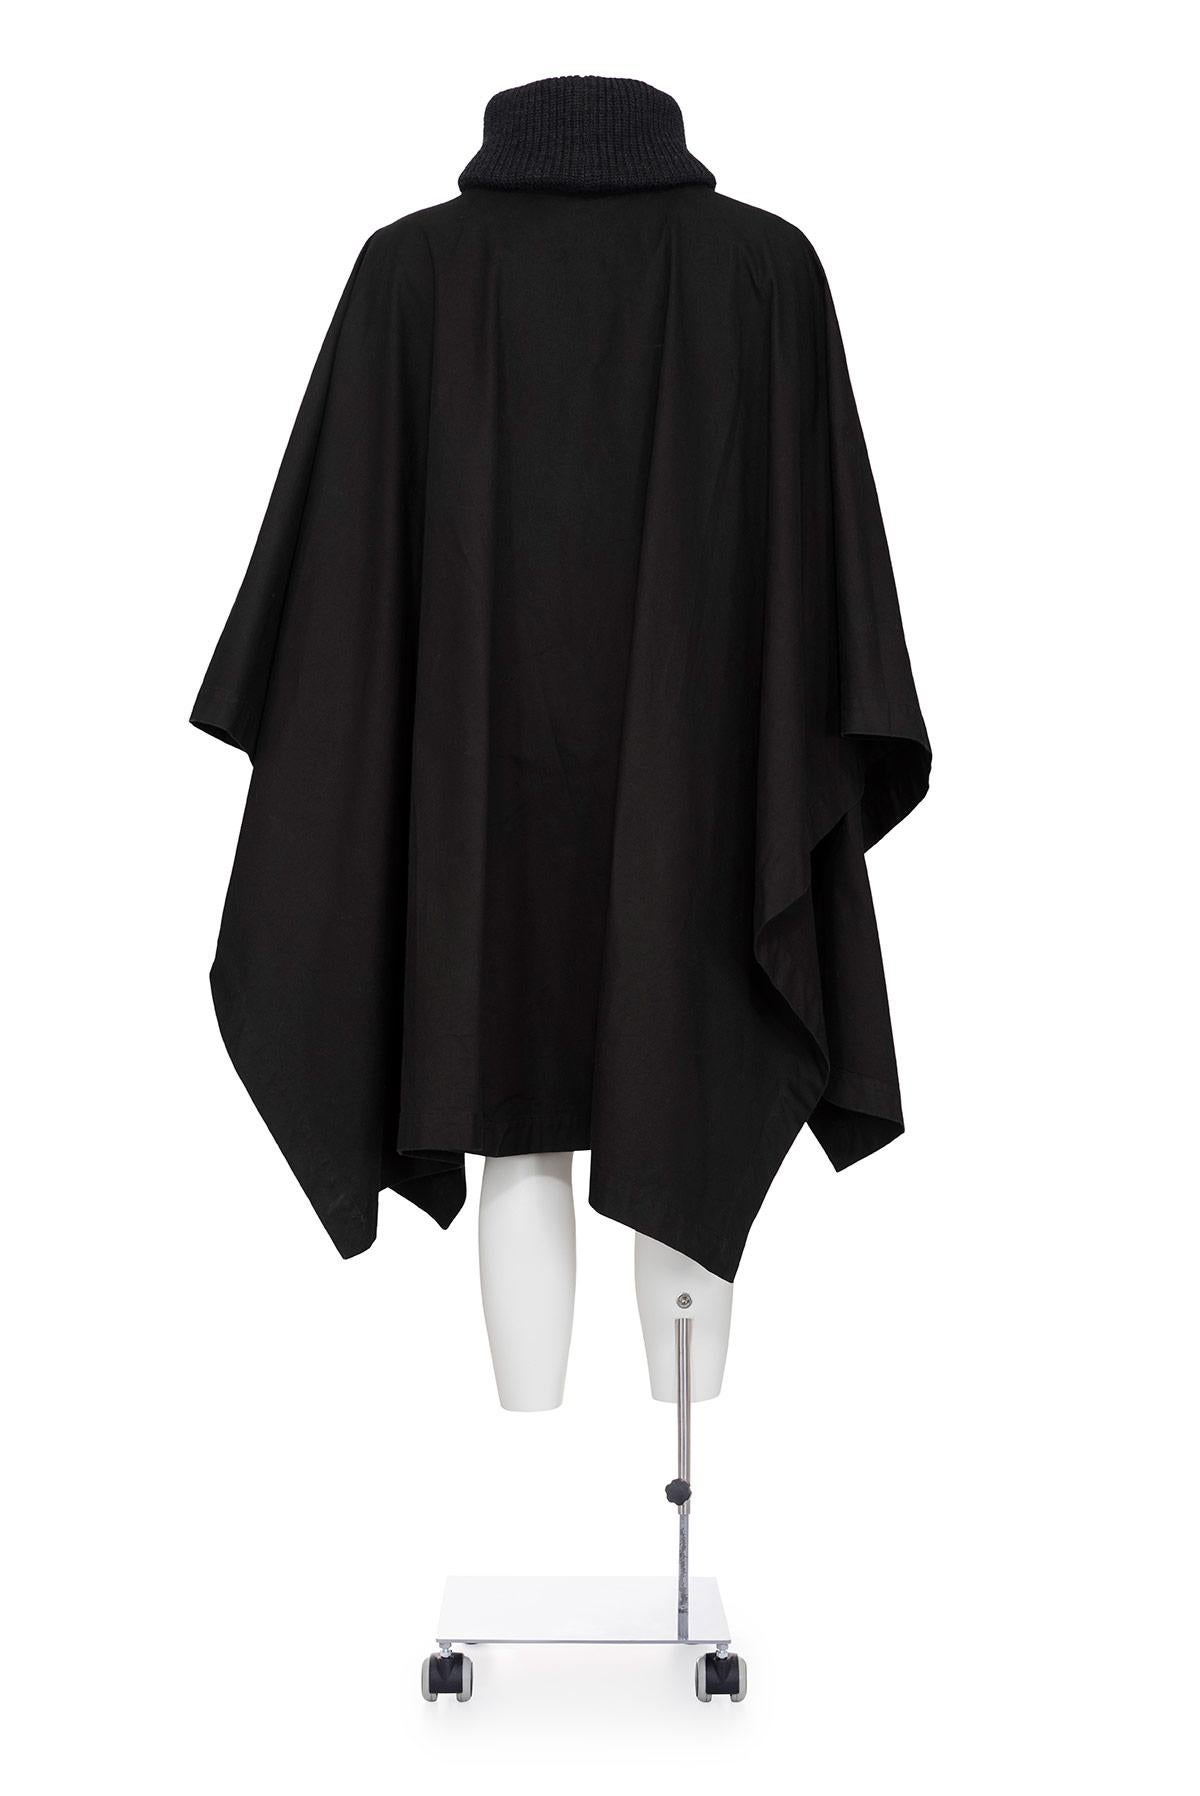 Fall Winter 2000 rare and iconic cape from 